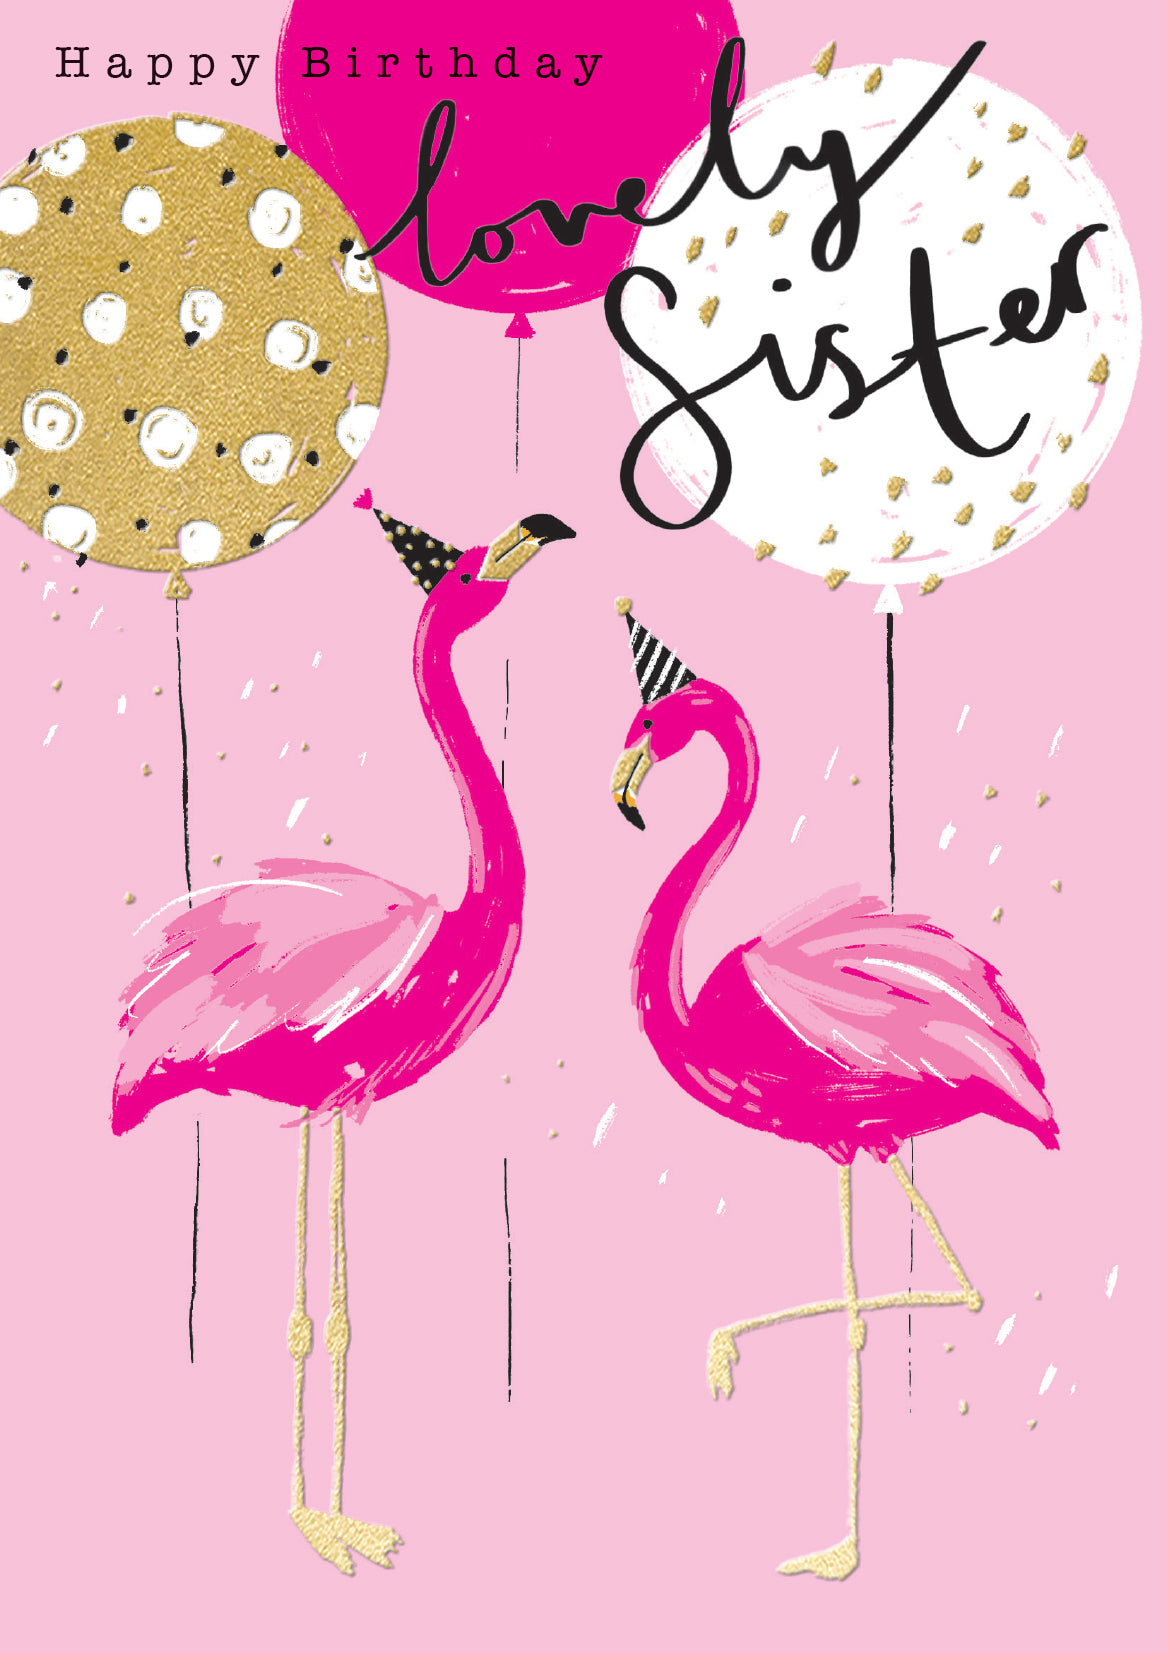 Lovely Sister Party Flamingoes Birthday Card from Penny Black